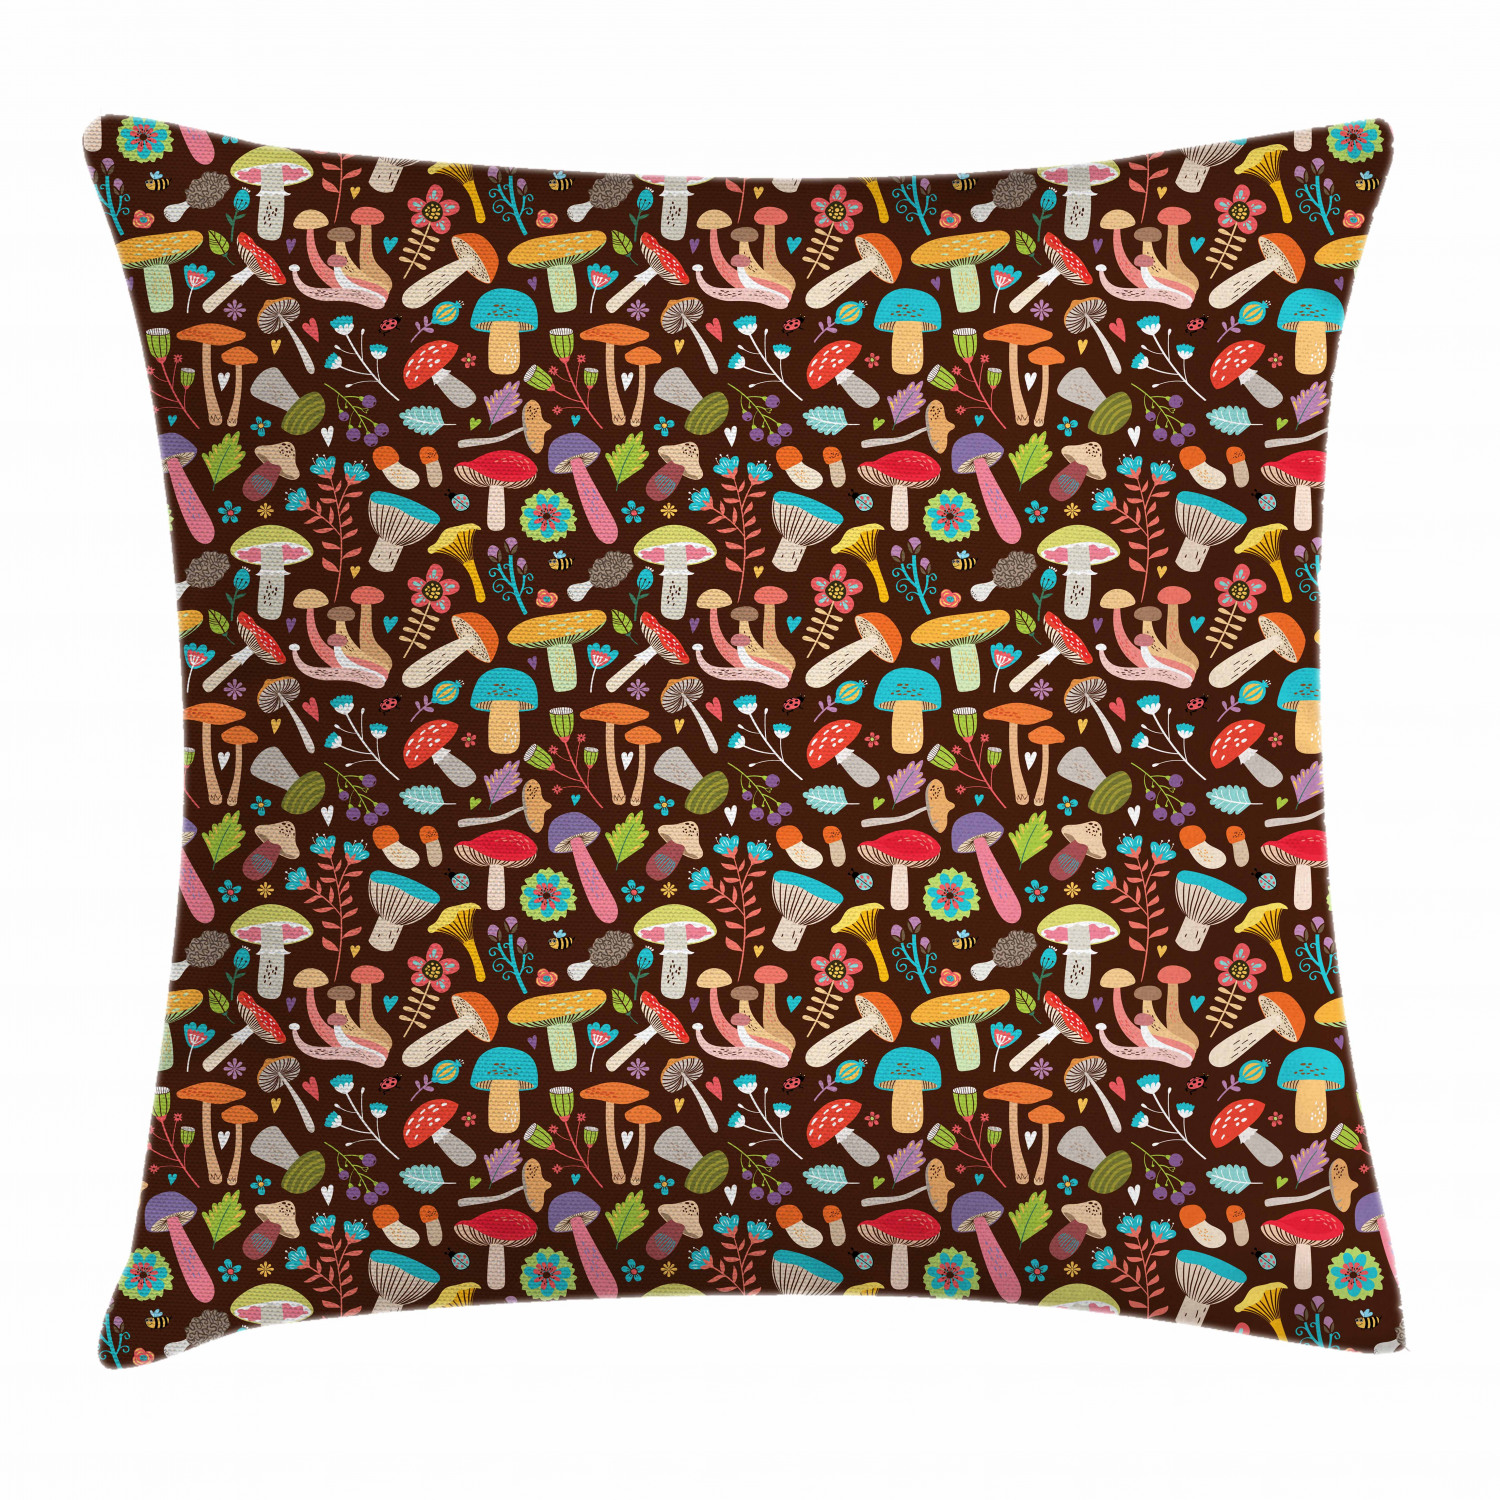 NANA Beaded Pillows Decorative Group of Mushrooms in The Forest Colorful Decorative Pillows for Bed 13.78 X 13.78 Inch Heart-Shaped Cushion Gift for Friends/Children/Girl/Valentine's Day 